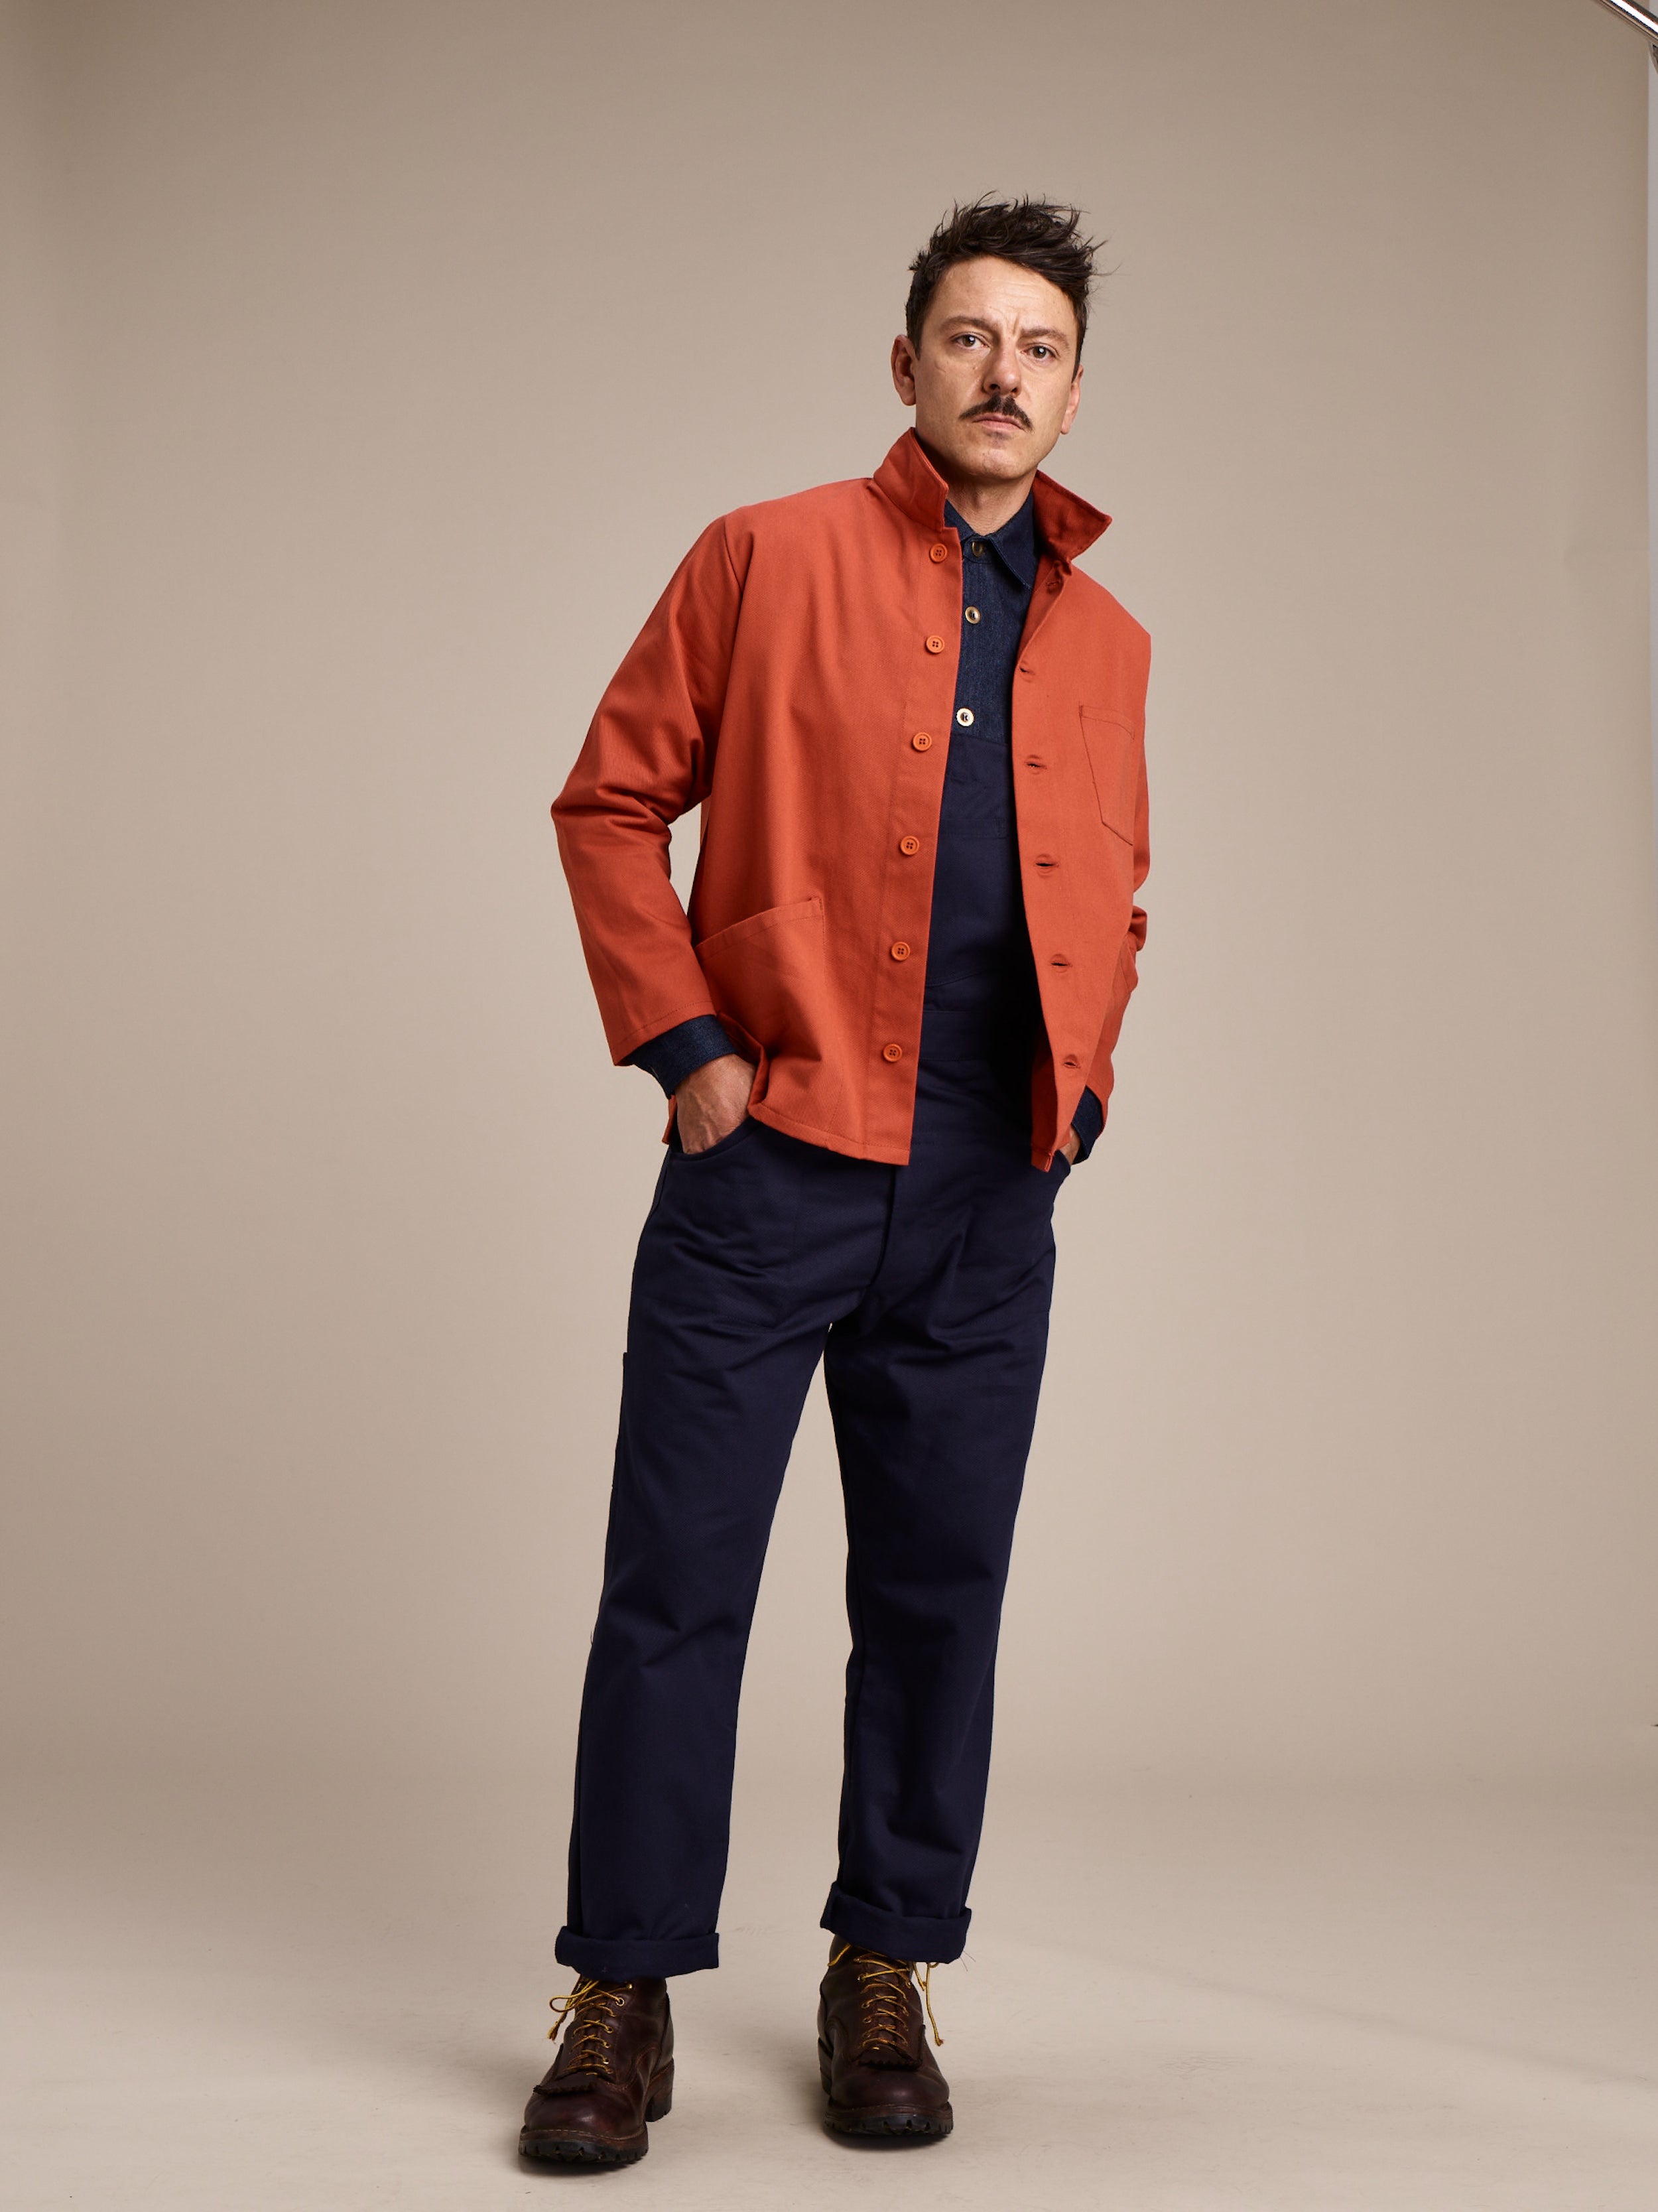 Man wearing Carrier Company Norfolk Work Jacket in Orange with Denim Collared Shirt and Men's Work Trouser